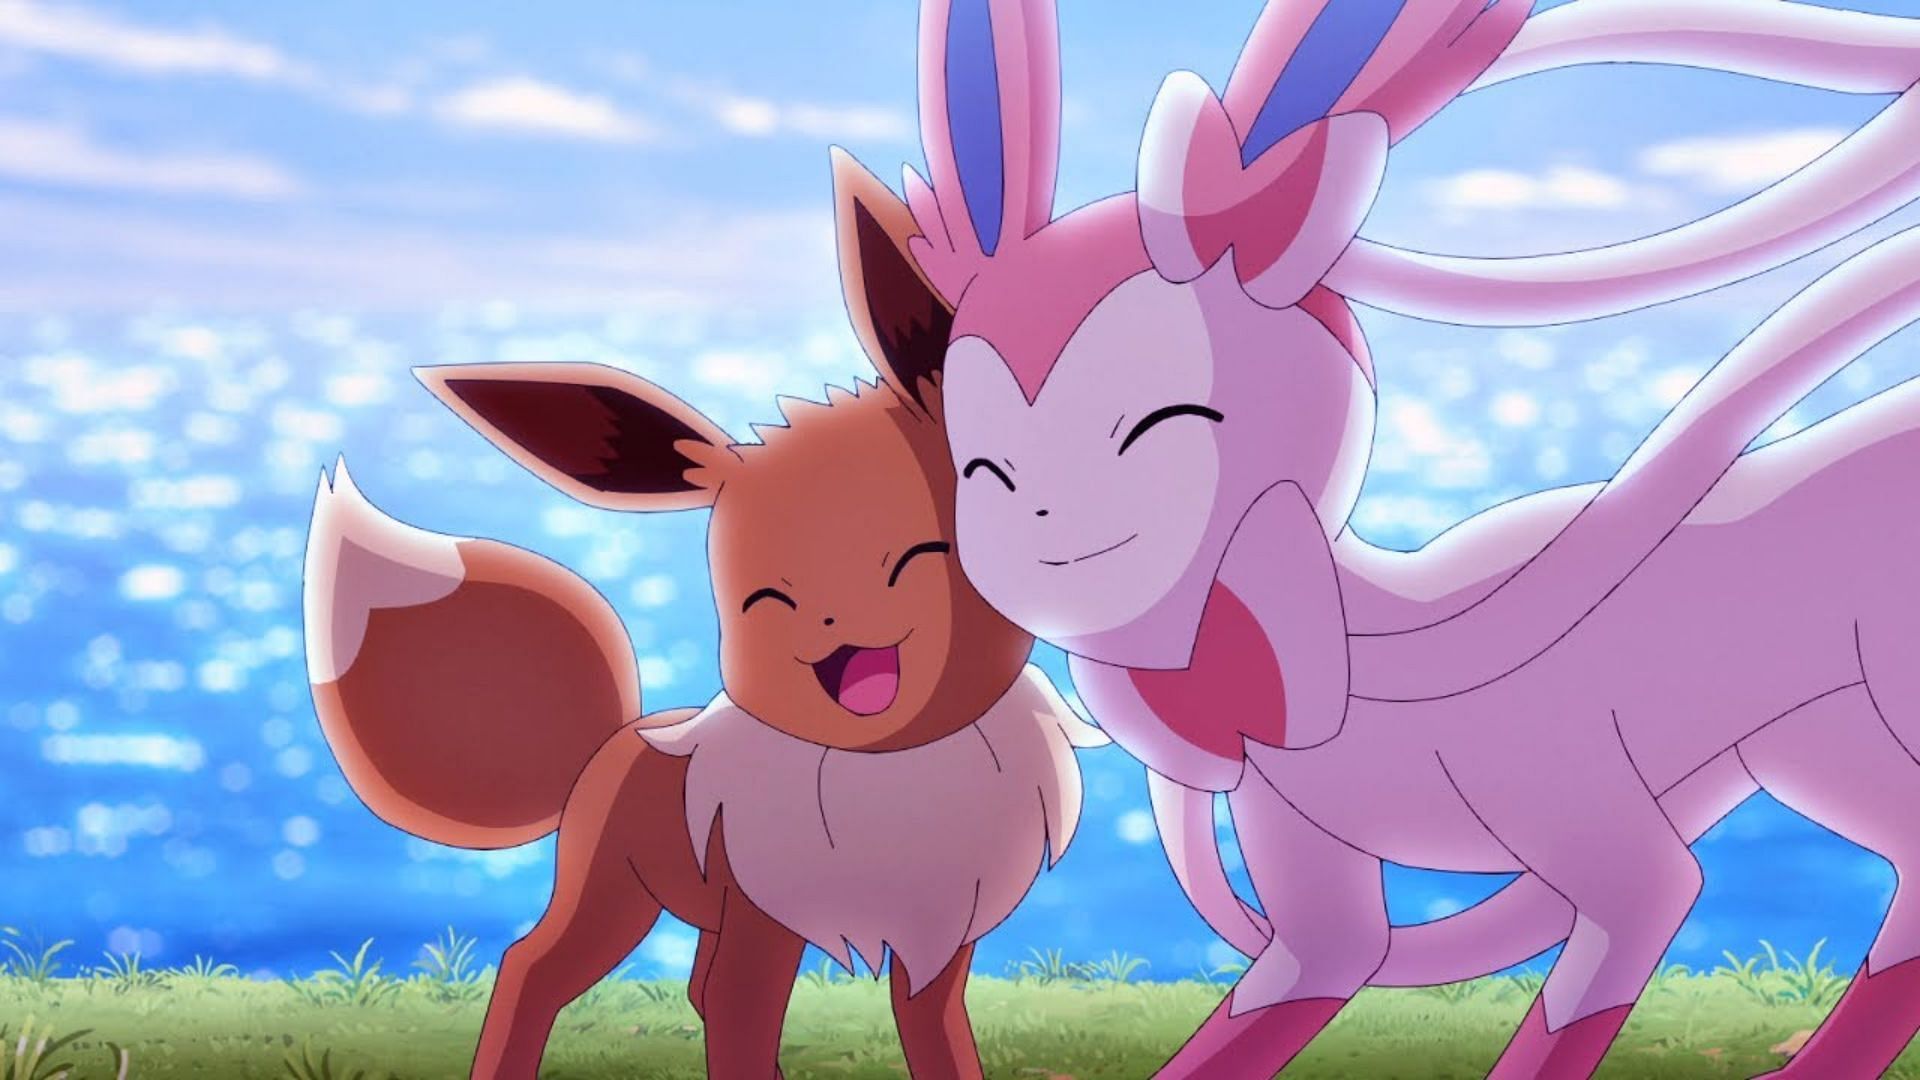 Eevee and Sylveon in the anime. (Image via The Pokemon Company)